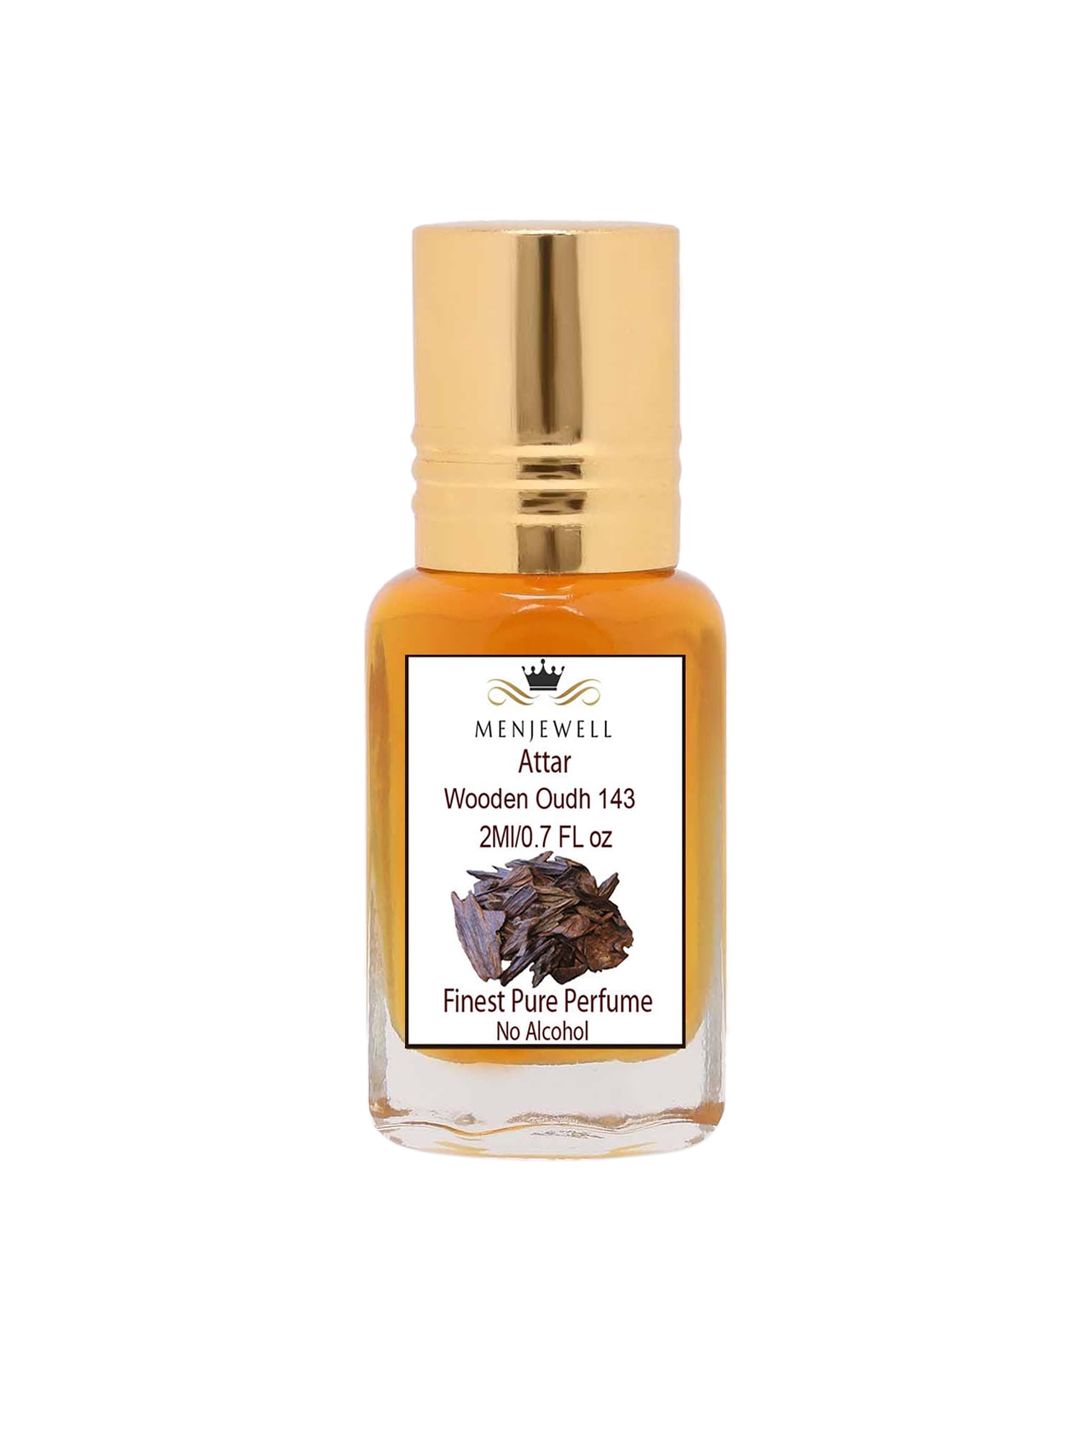 Menjewell Wooden Oudh 143 Attar 2ml Price in India